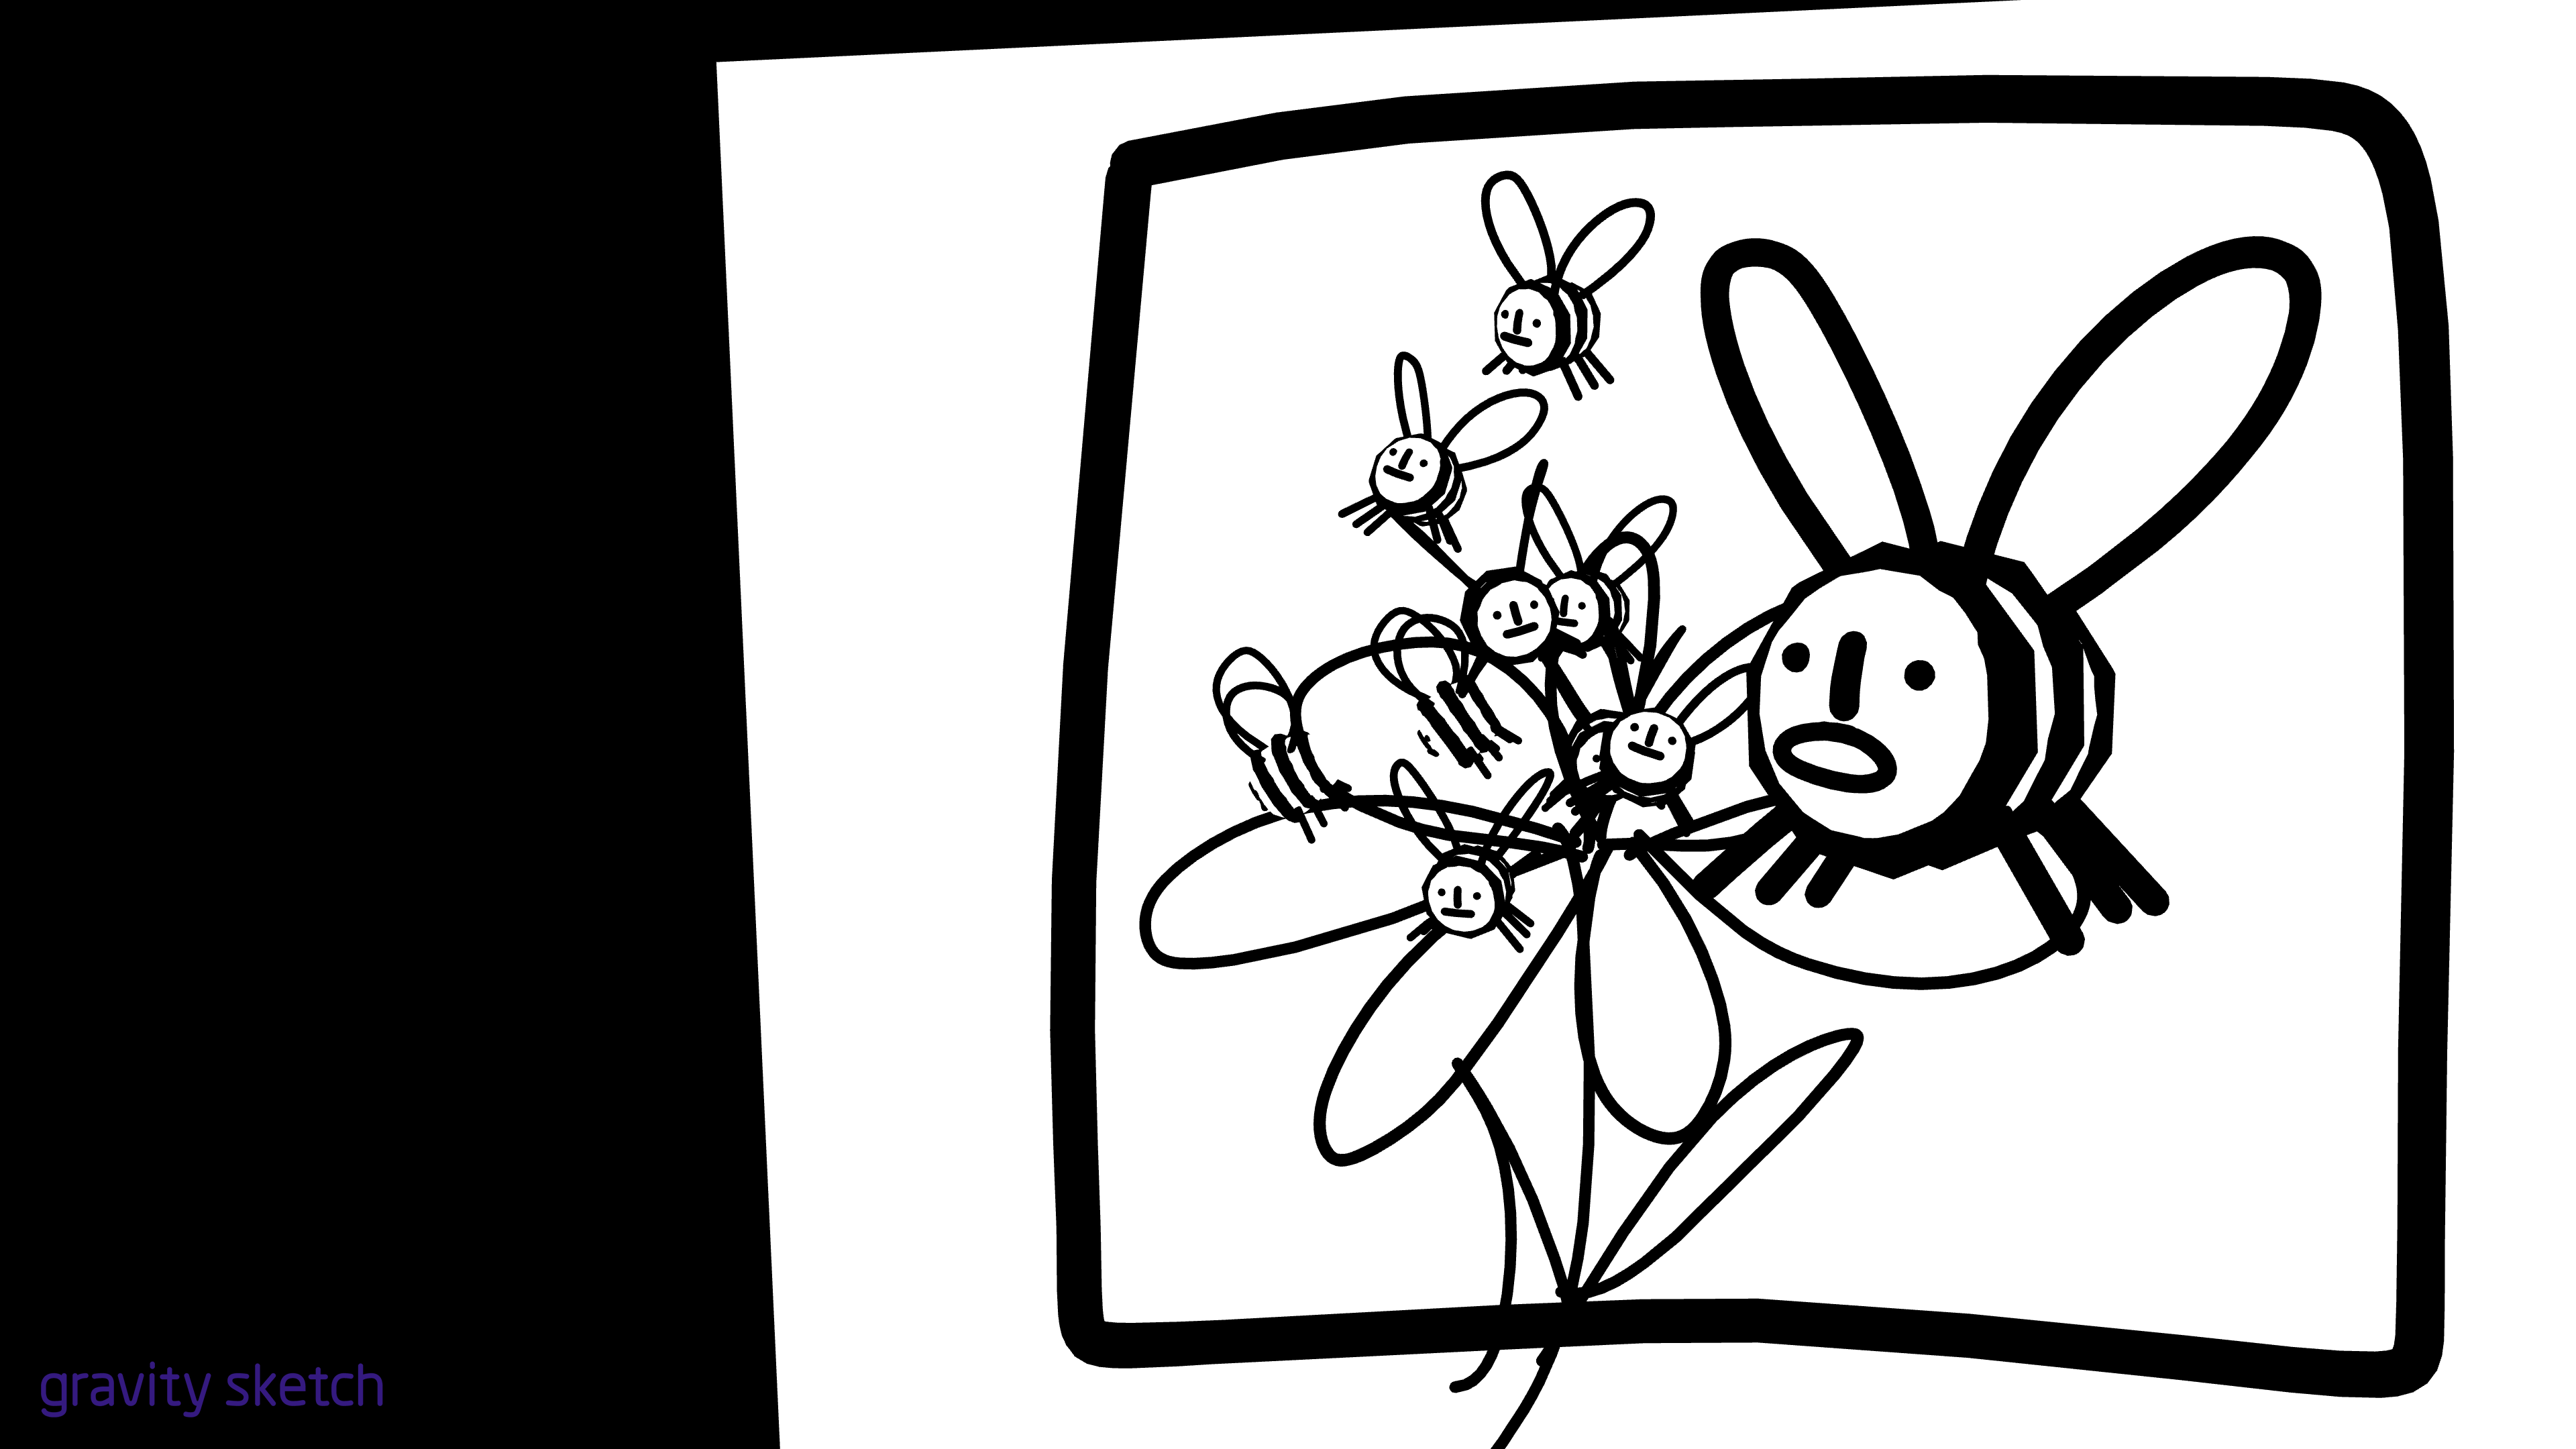 black and white cartoon image of bees